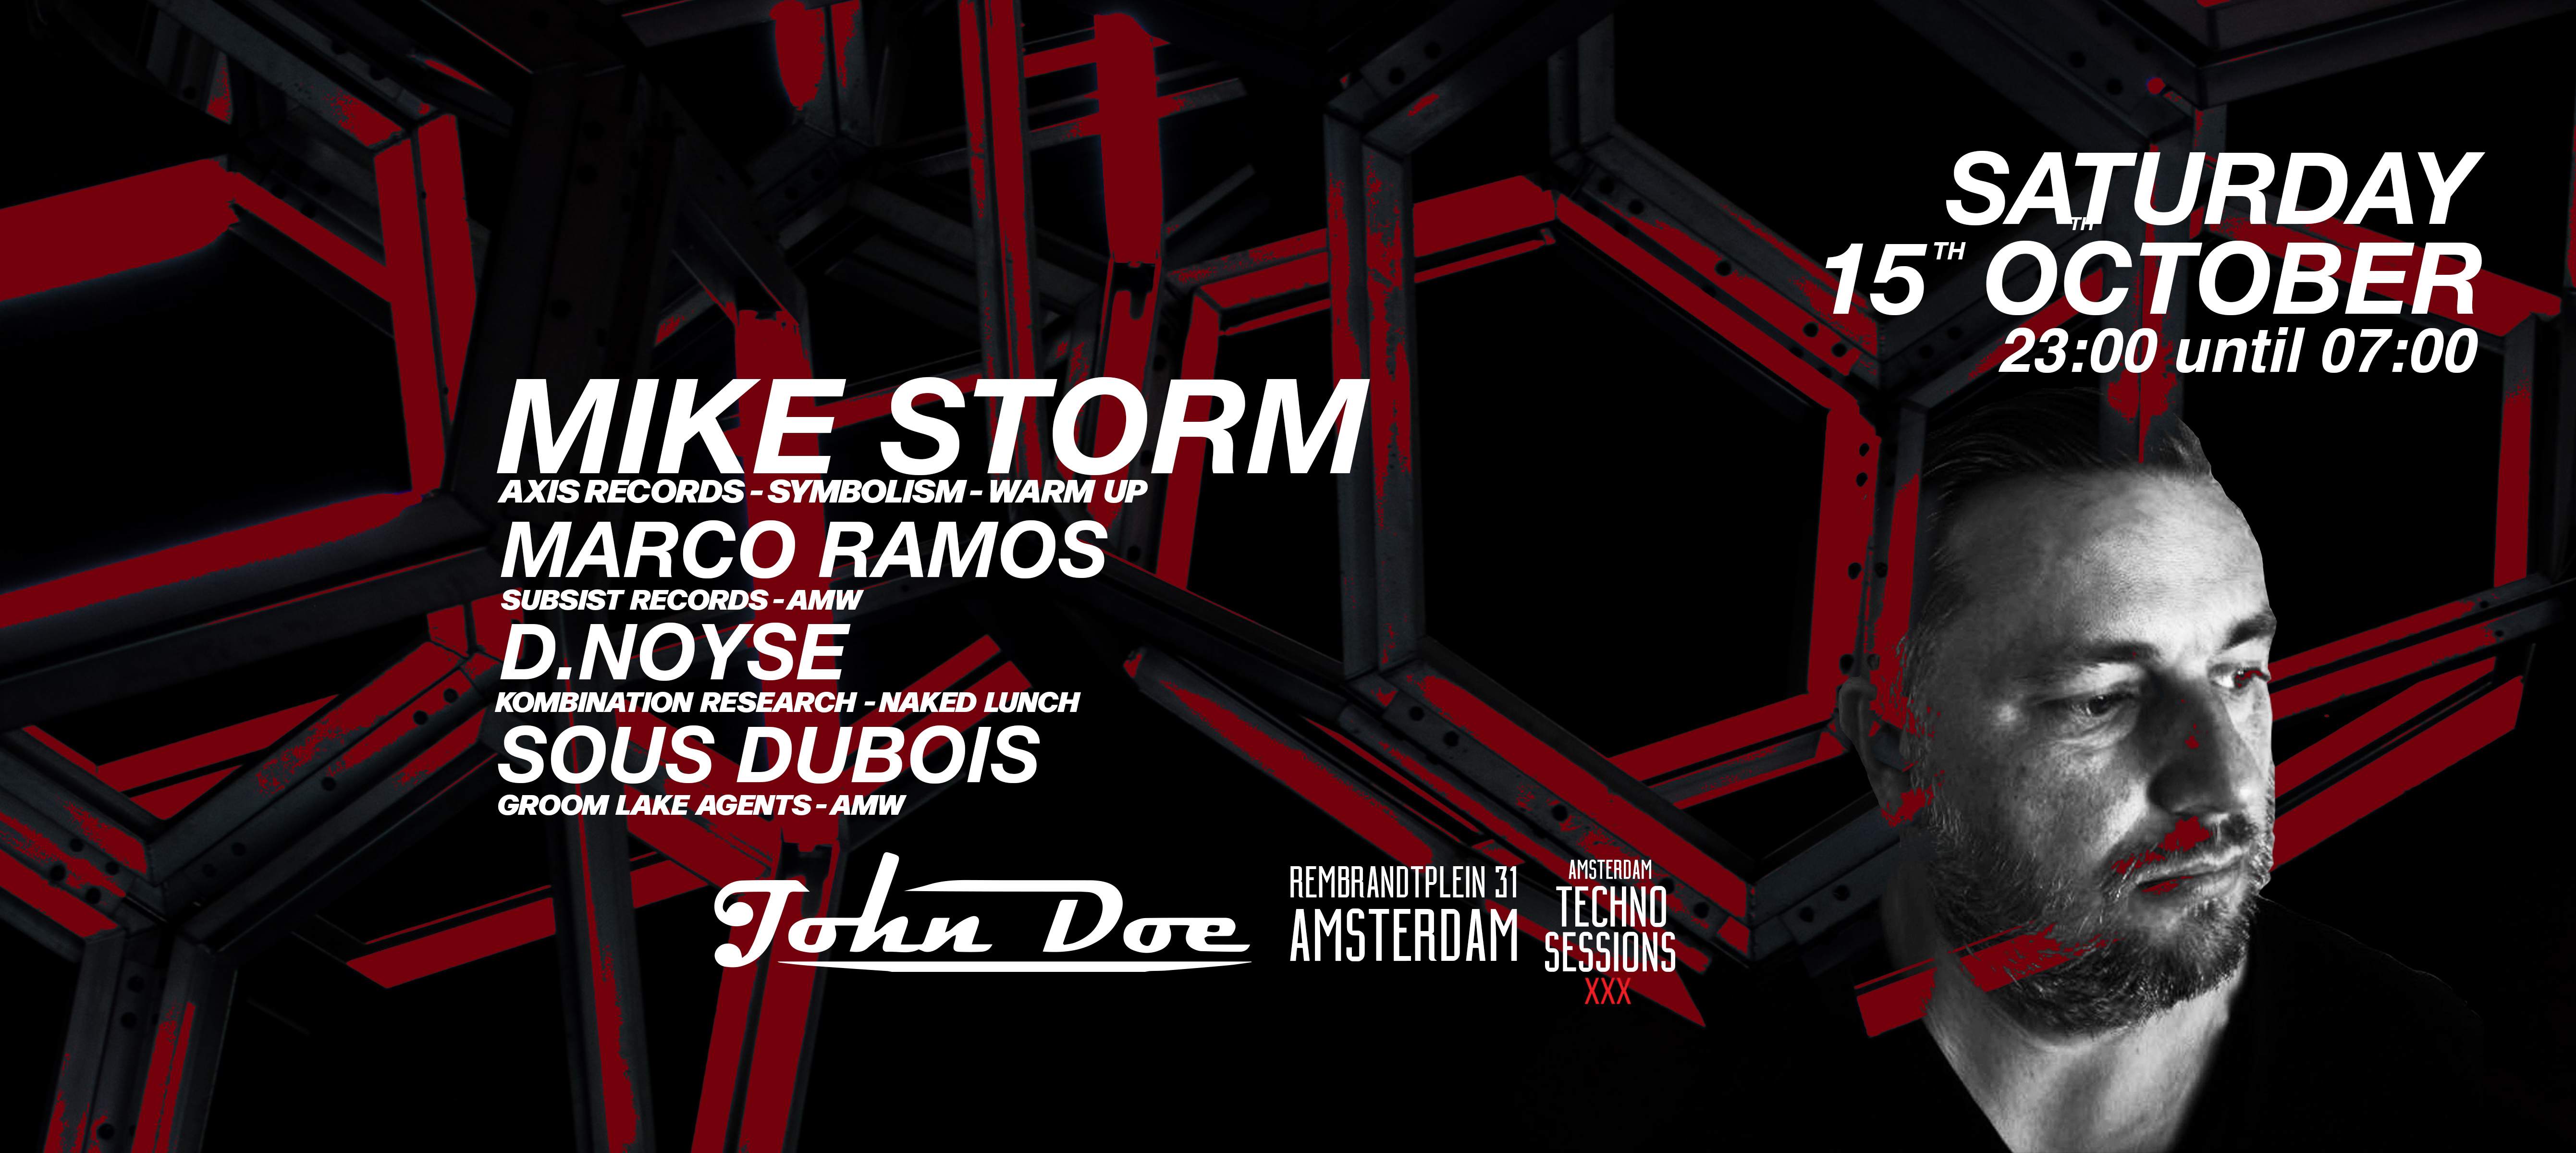 Amsterdam Techno Sessions with Mike Storm (Axis Records - Symbolism - Warm Up) - LIVE - Página trasera